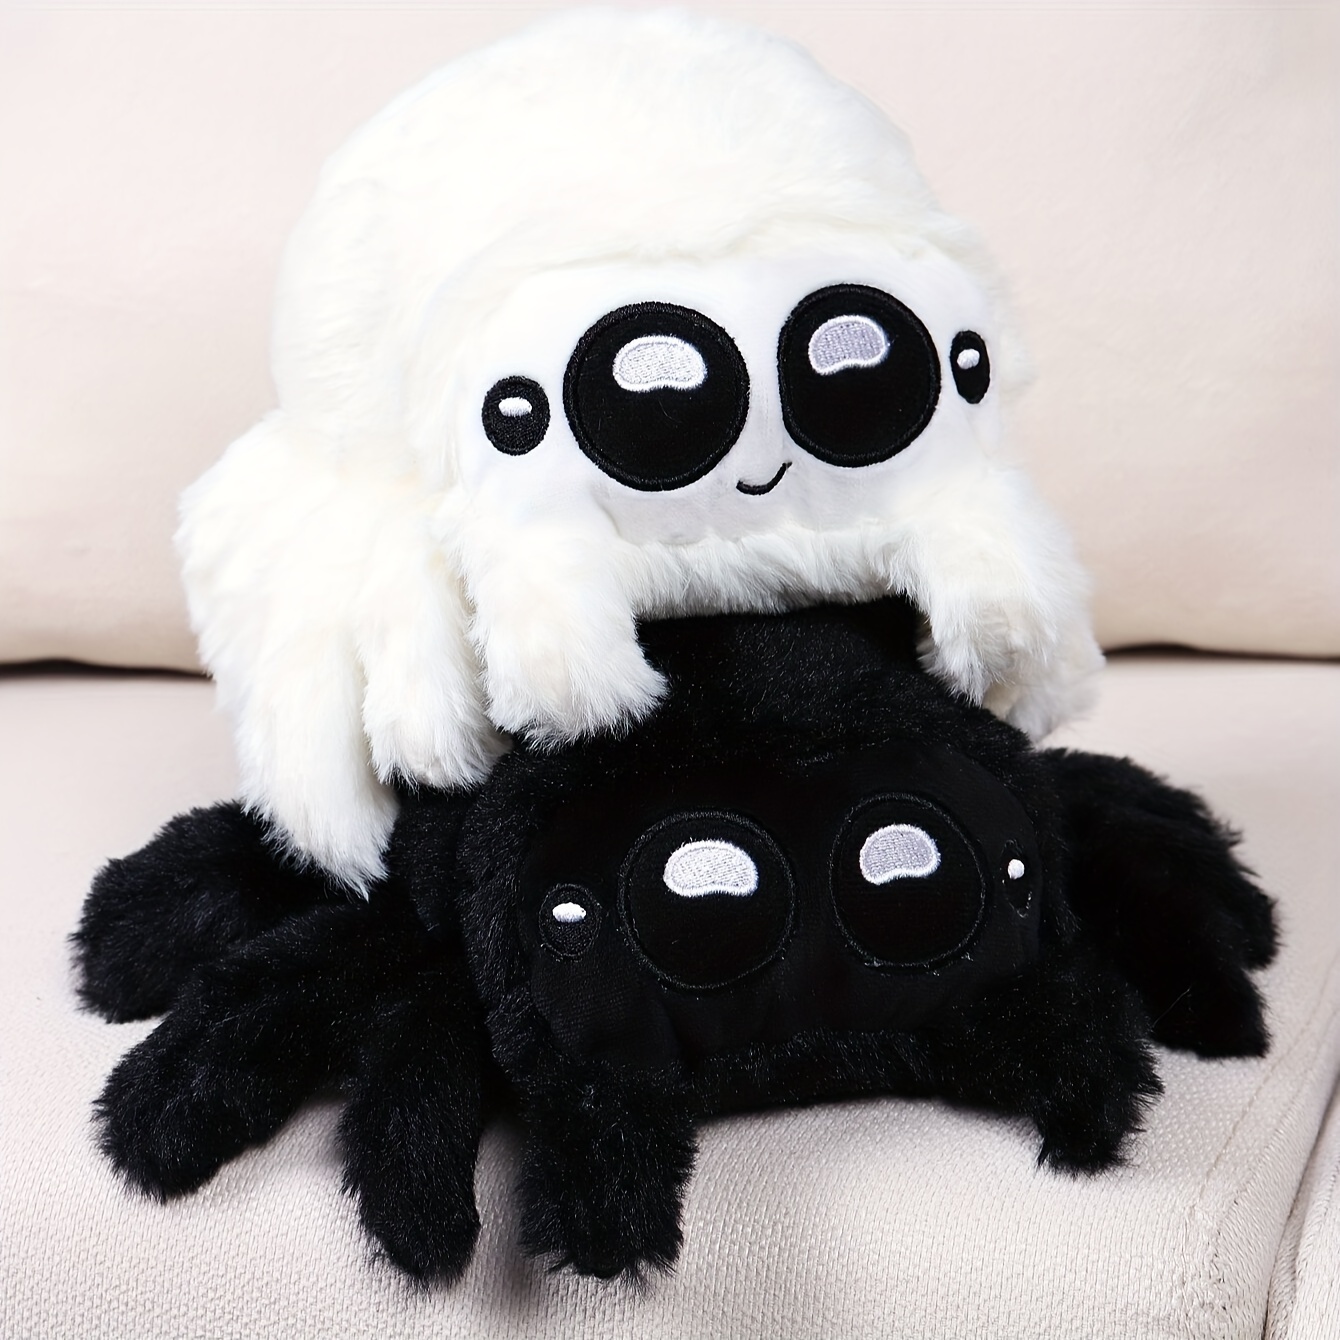 

1pc Black And White Plush Spider Crawling Animal Toy Suitable For Daily Home Use